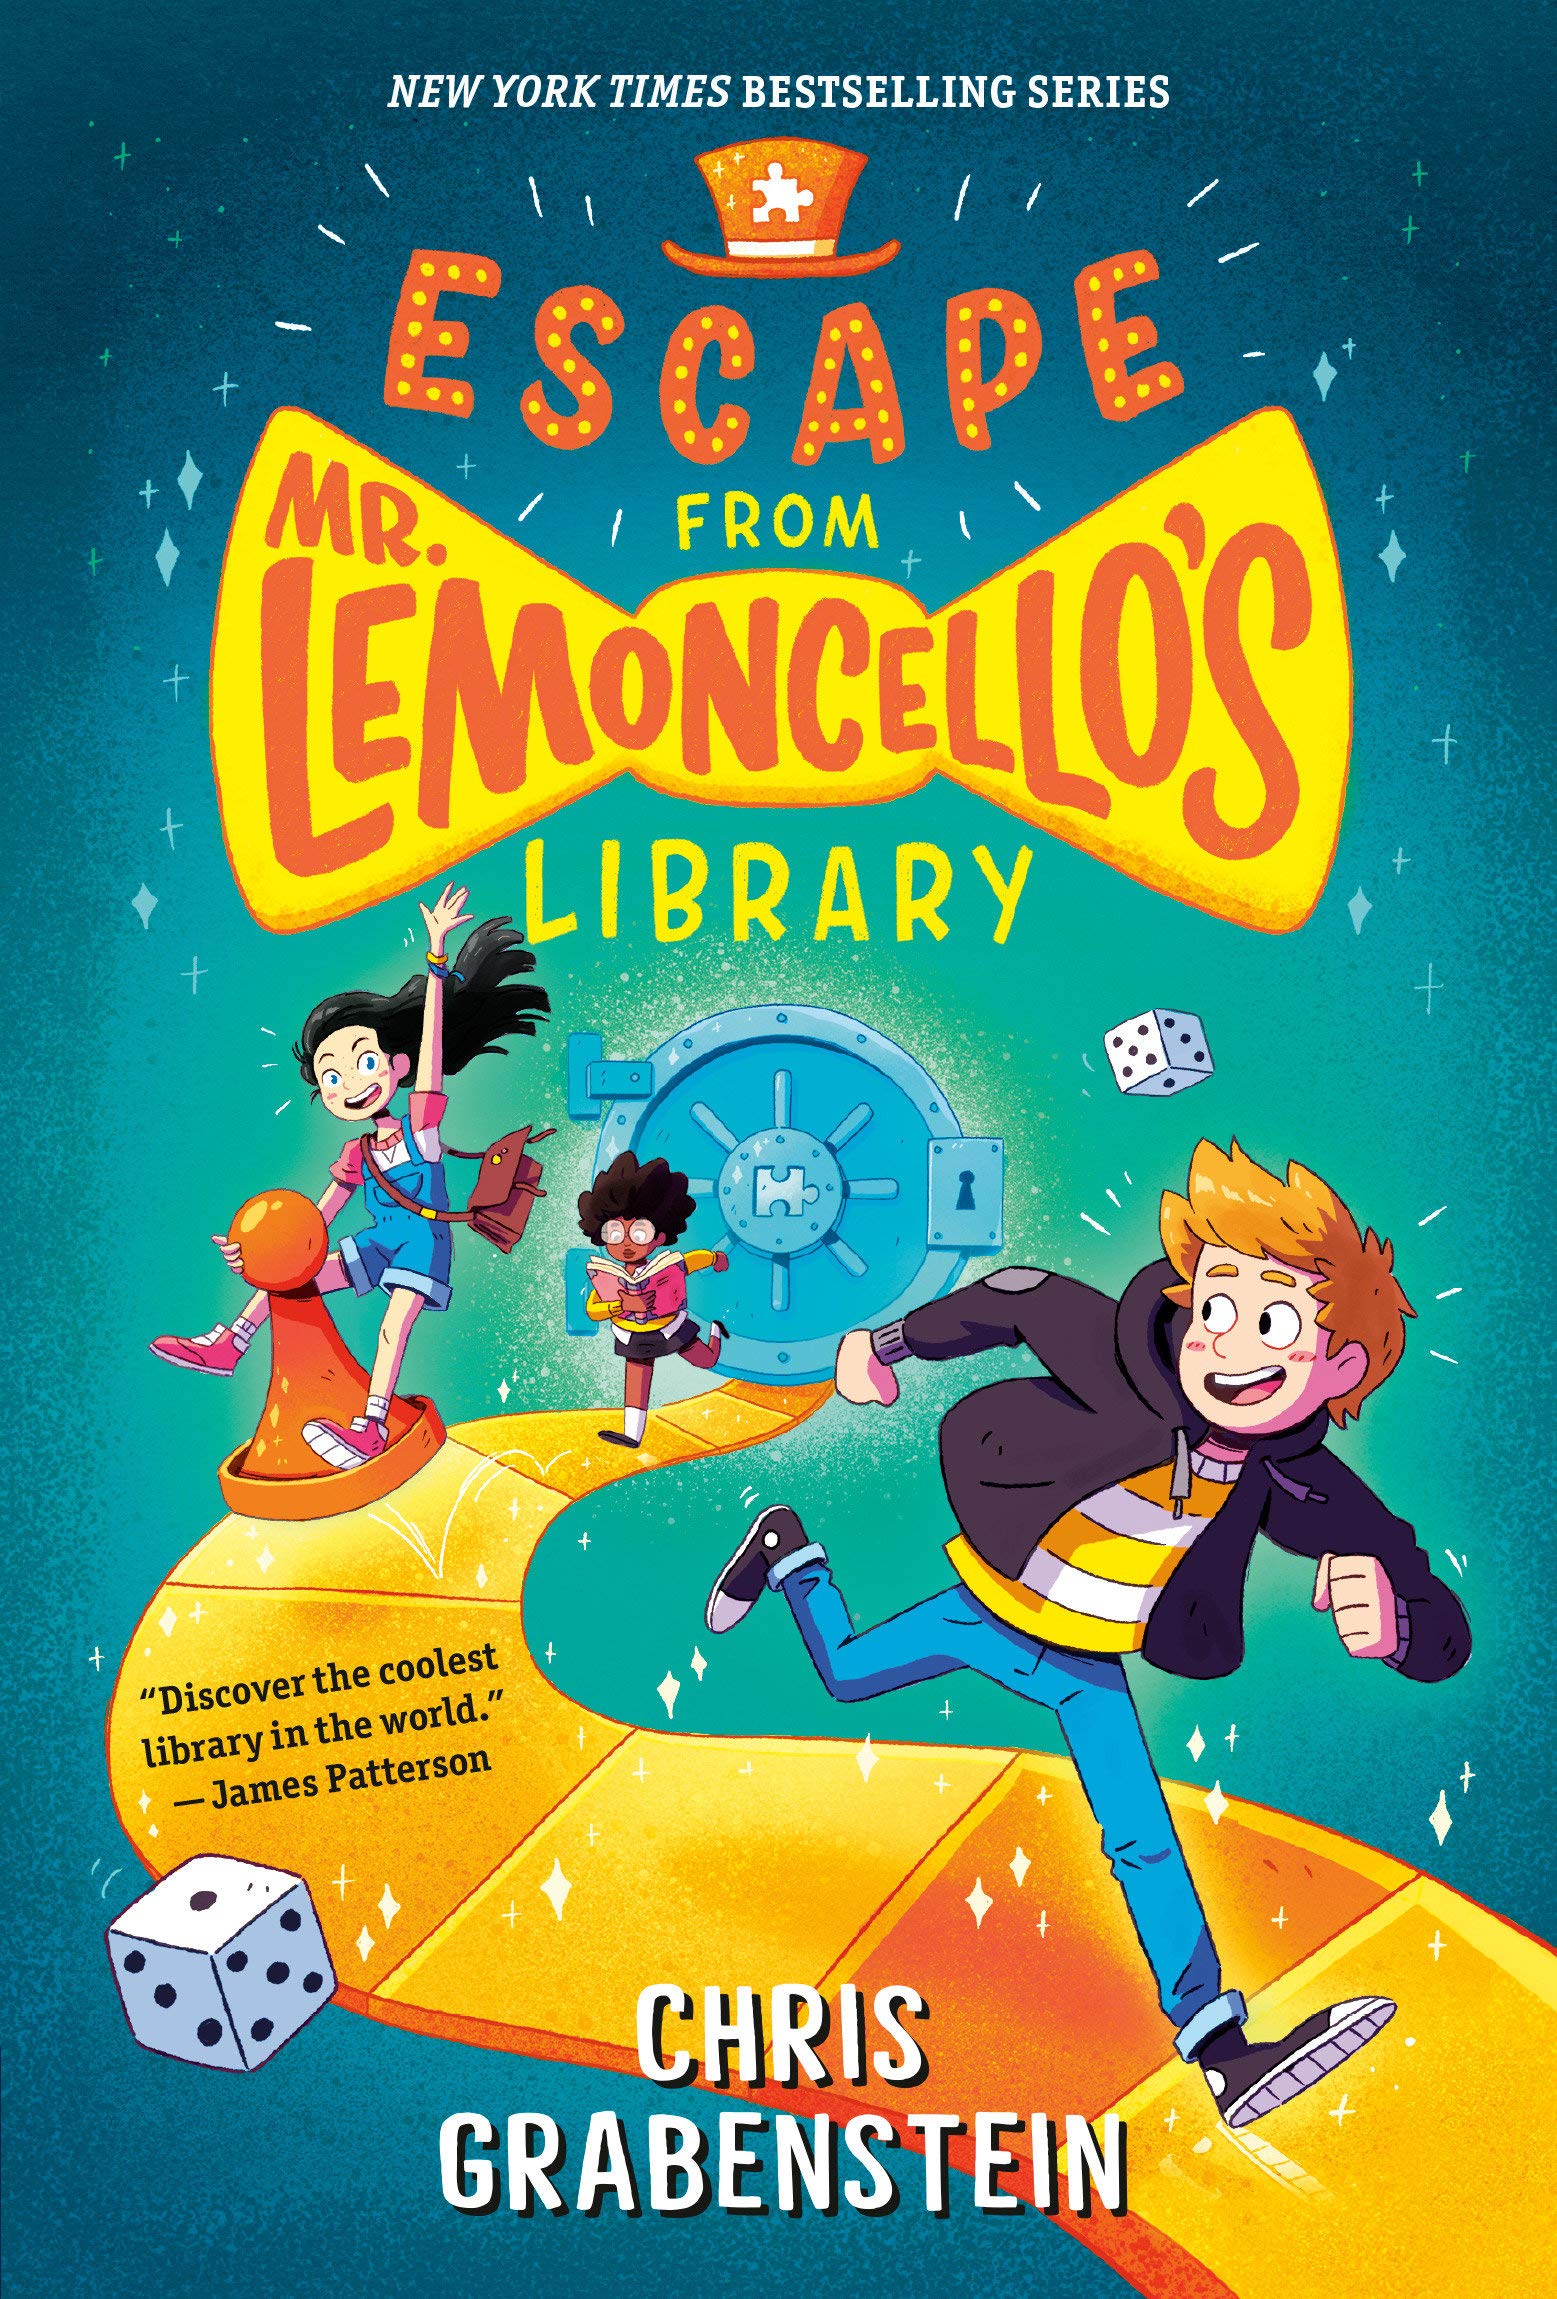 IMG : Escape from Mr.Lemoncello's Library #1